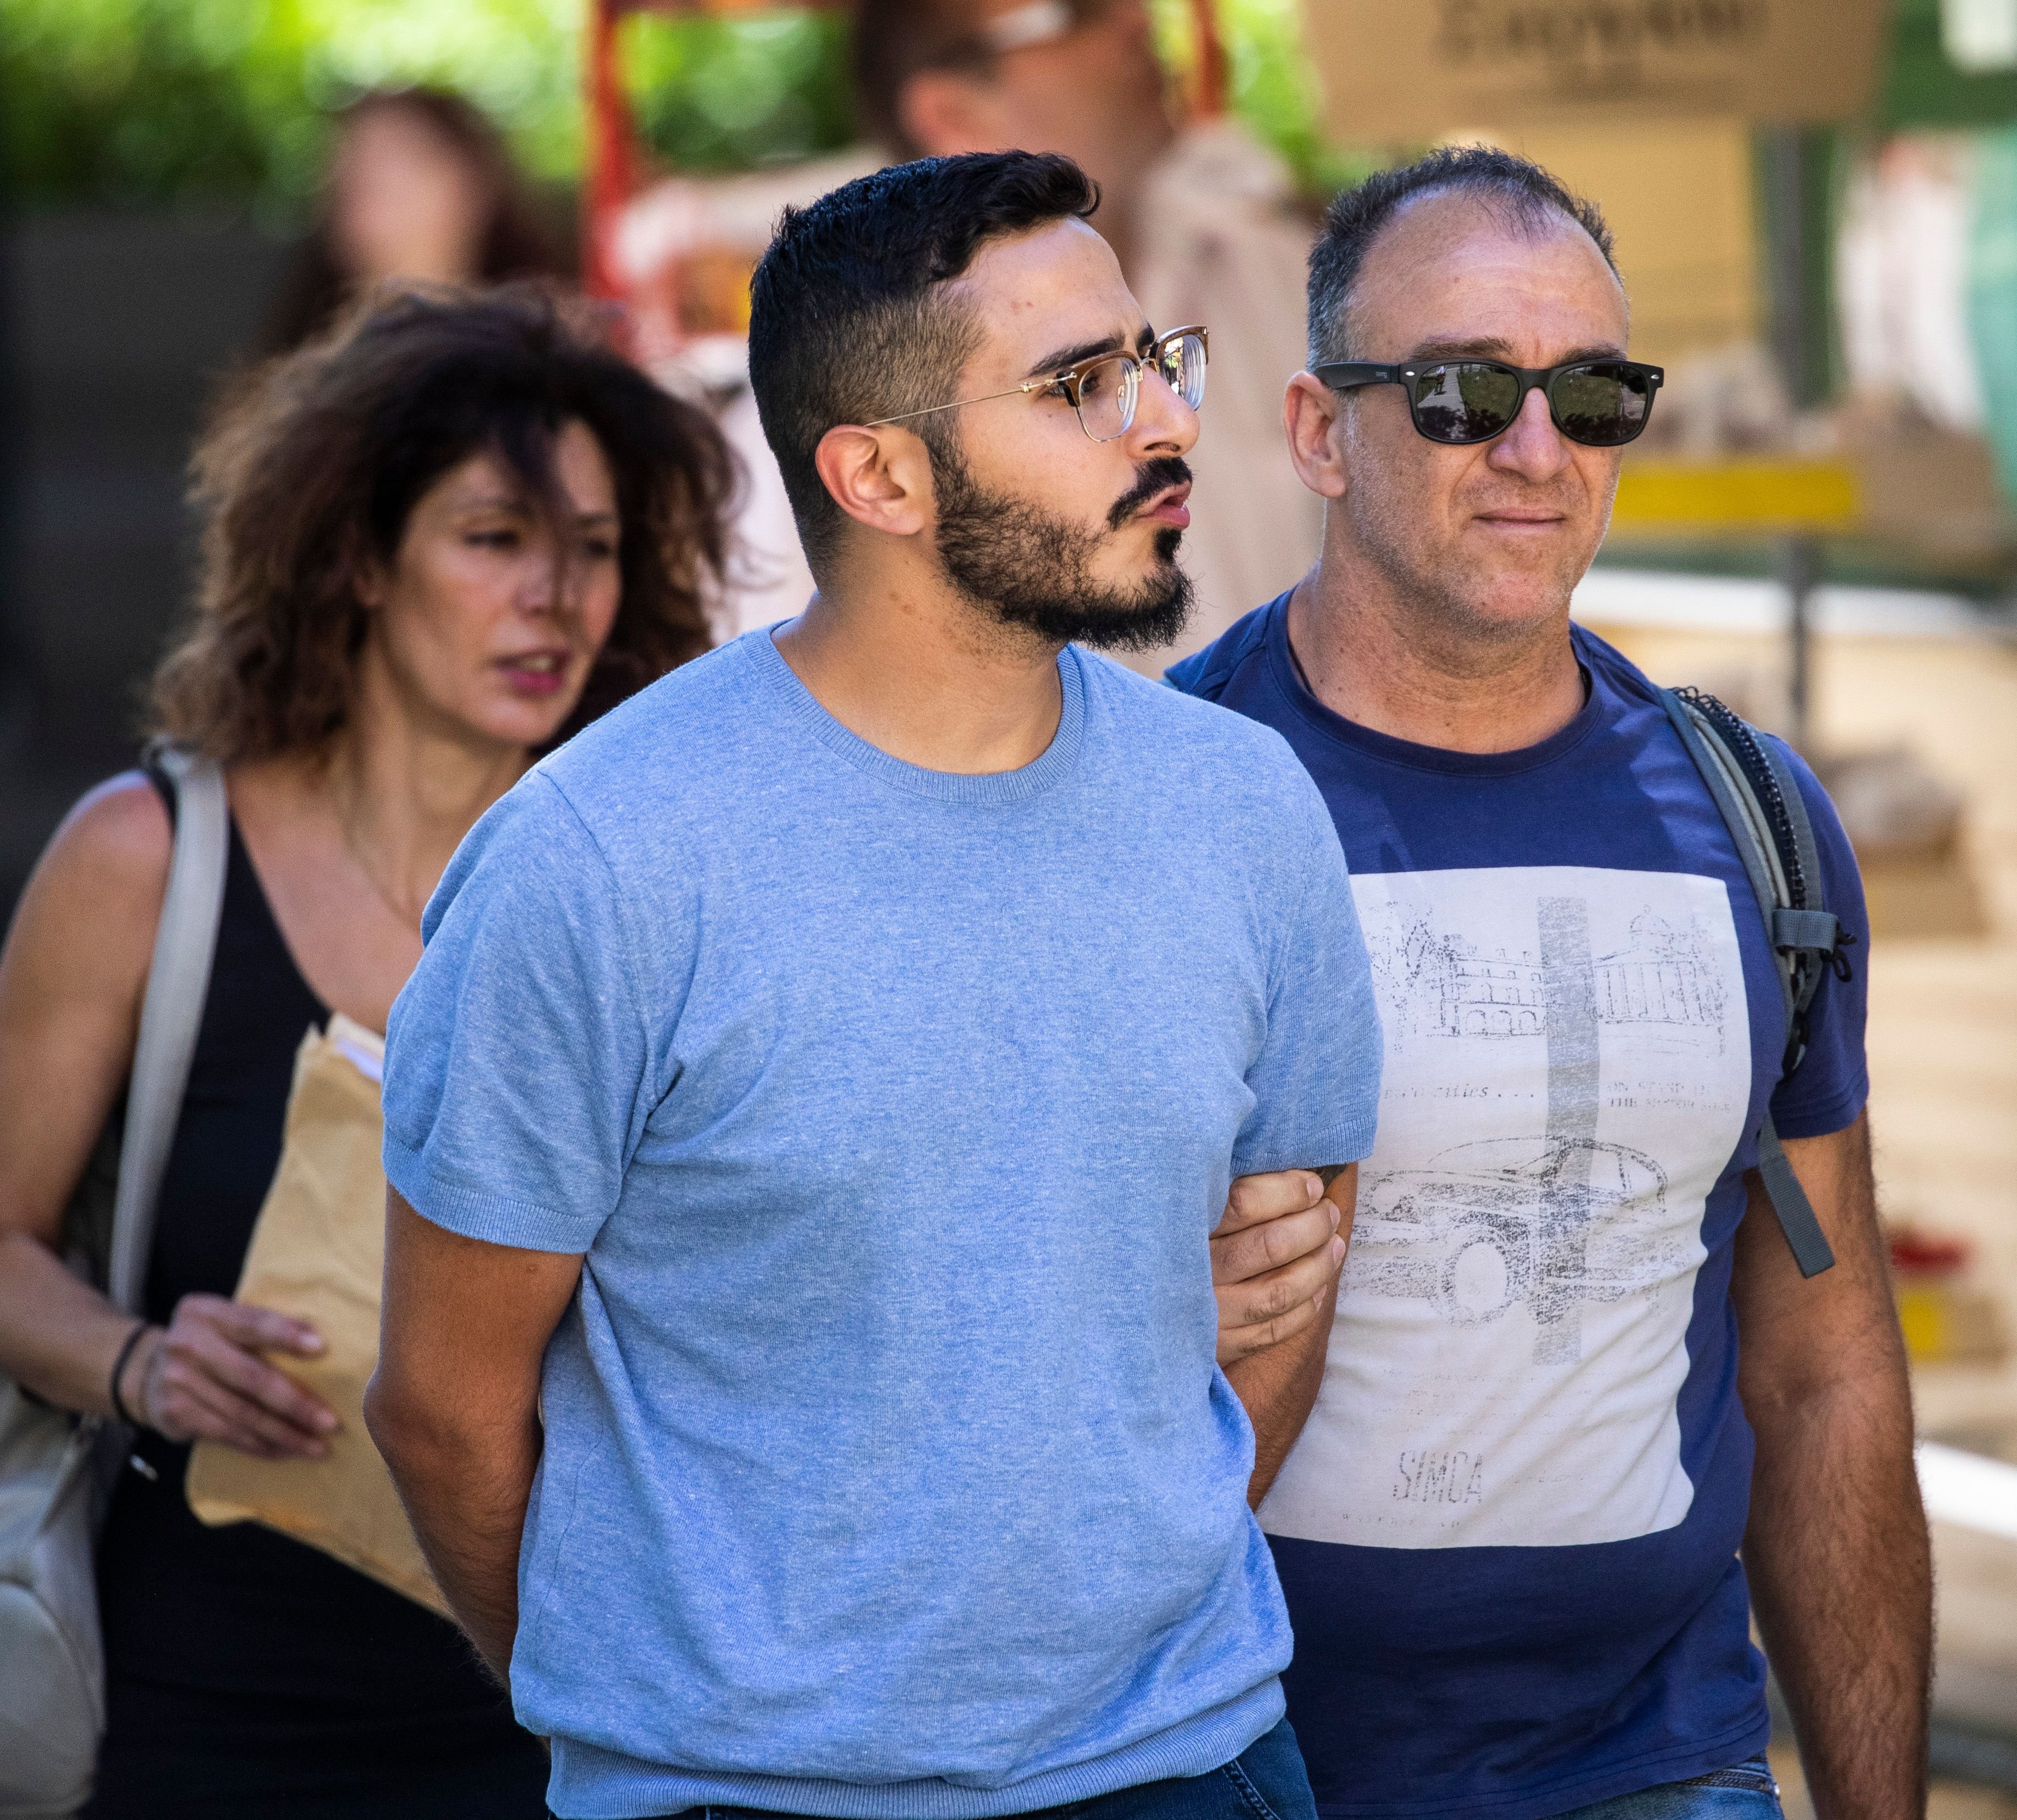 Picture taken on July 1, 2019 shows the so-called "Tinder swindler" (L) as he is expelled from the city of Athens, Greece | Photo: Getty Images